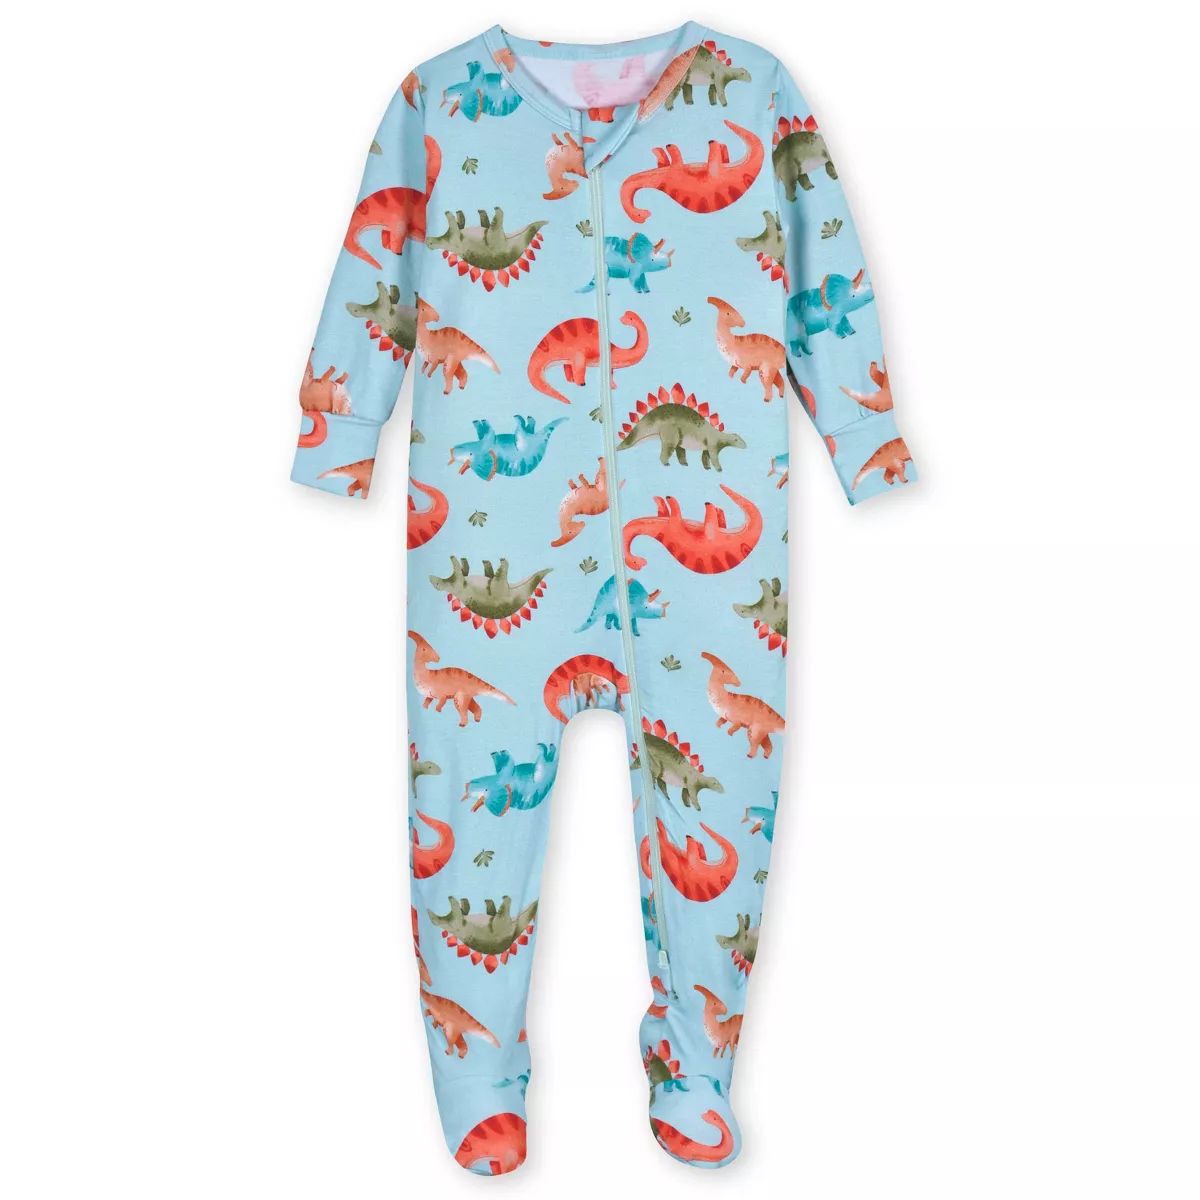 Gerber Baby and Toddler Buttery-Soft Snug Fit Footed Pajamas | Target